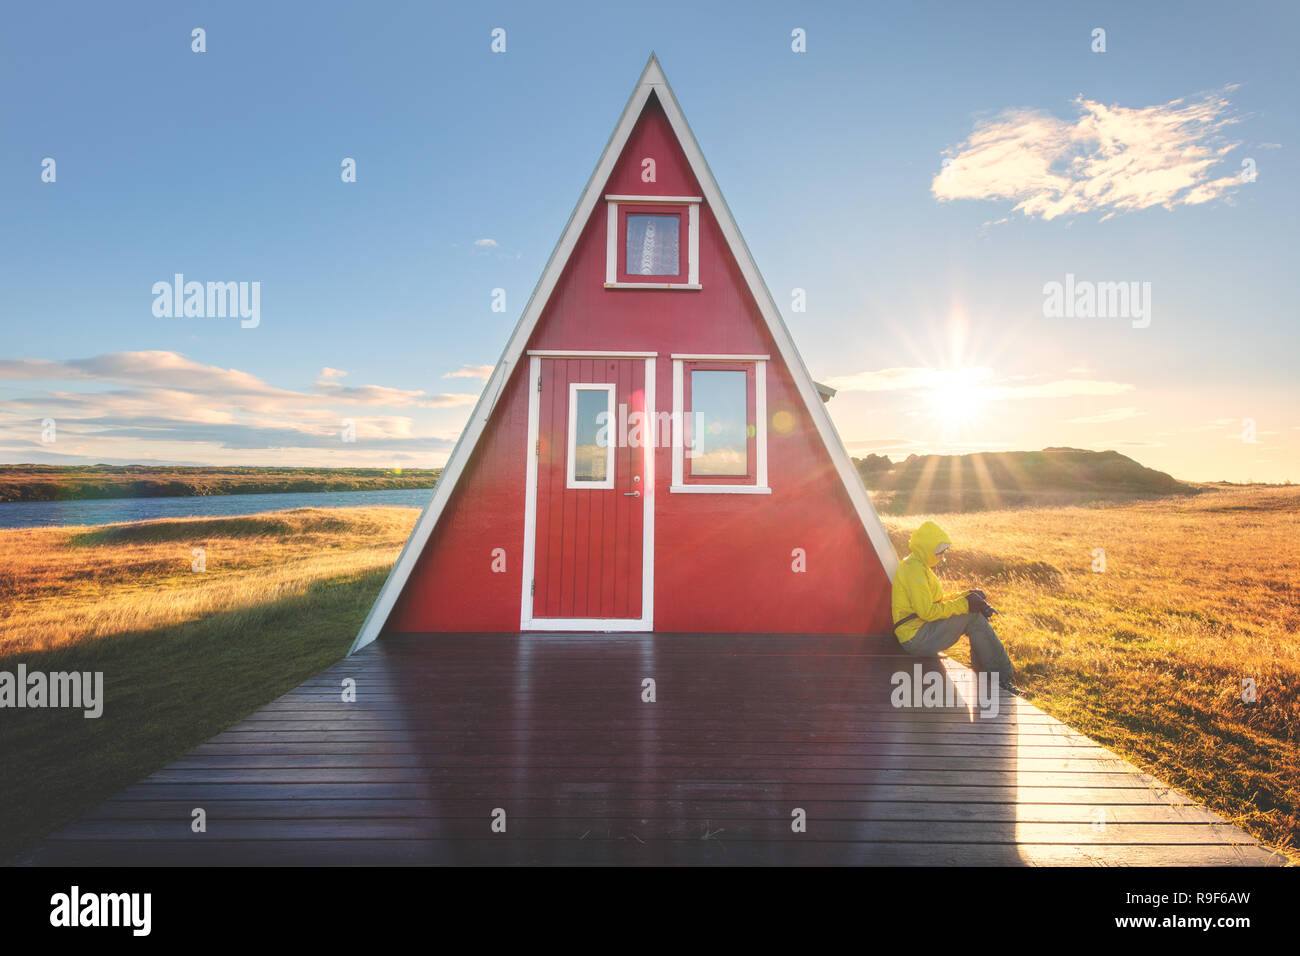 Cute triangle little house cabin red Iceland Icelandic Stock Photo